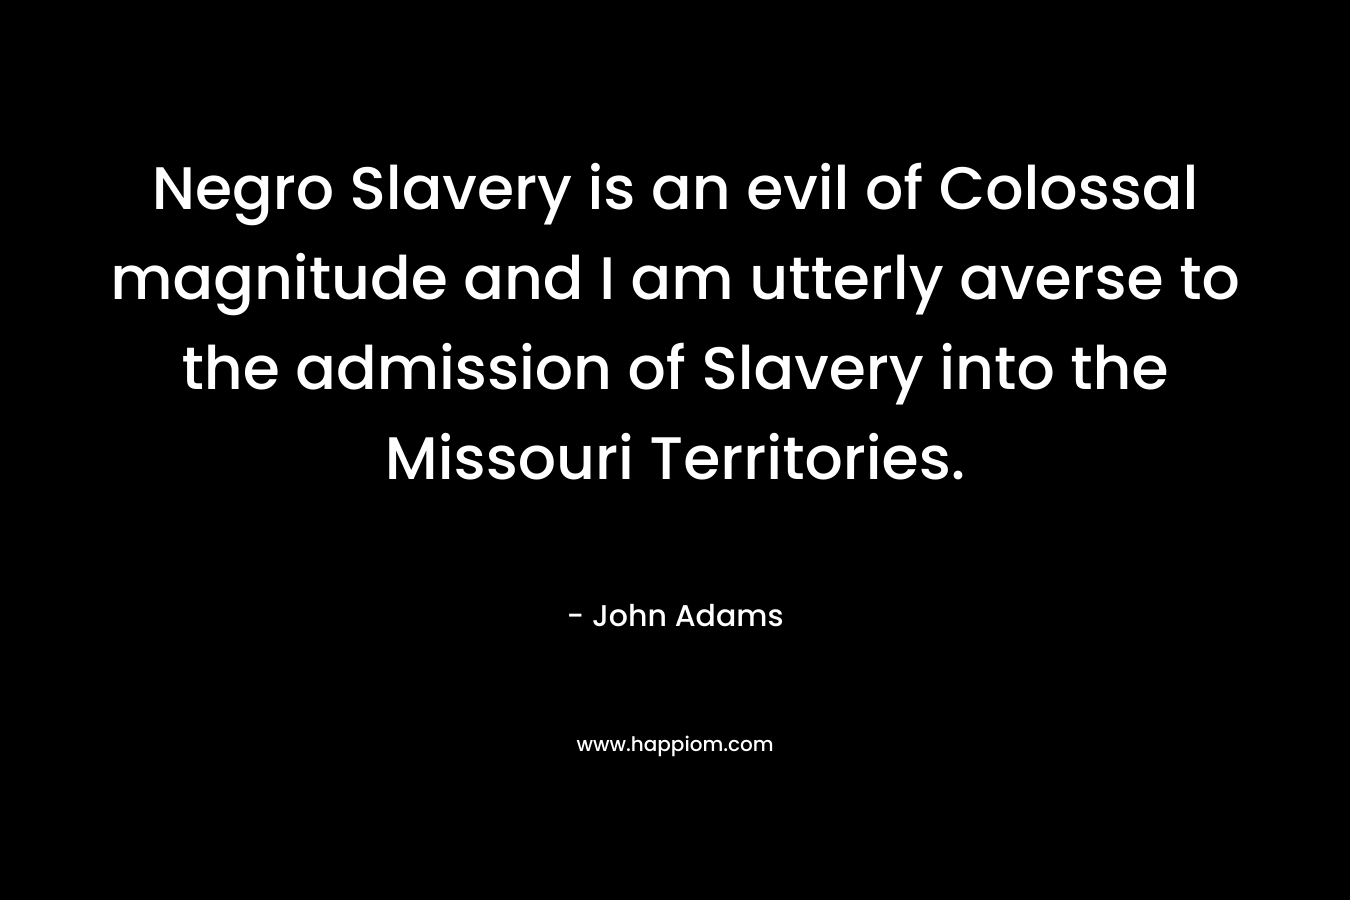 Negro Slavery is an evil of Colossal magnitude and I am utterly averse to the admission of Slavery into the Missouri Territories.